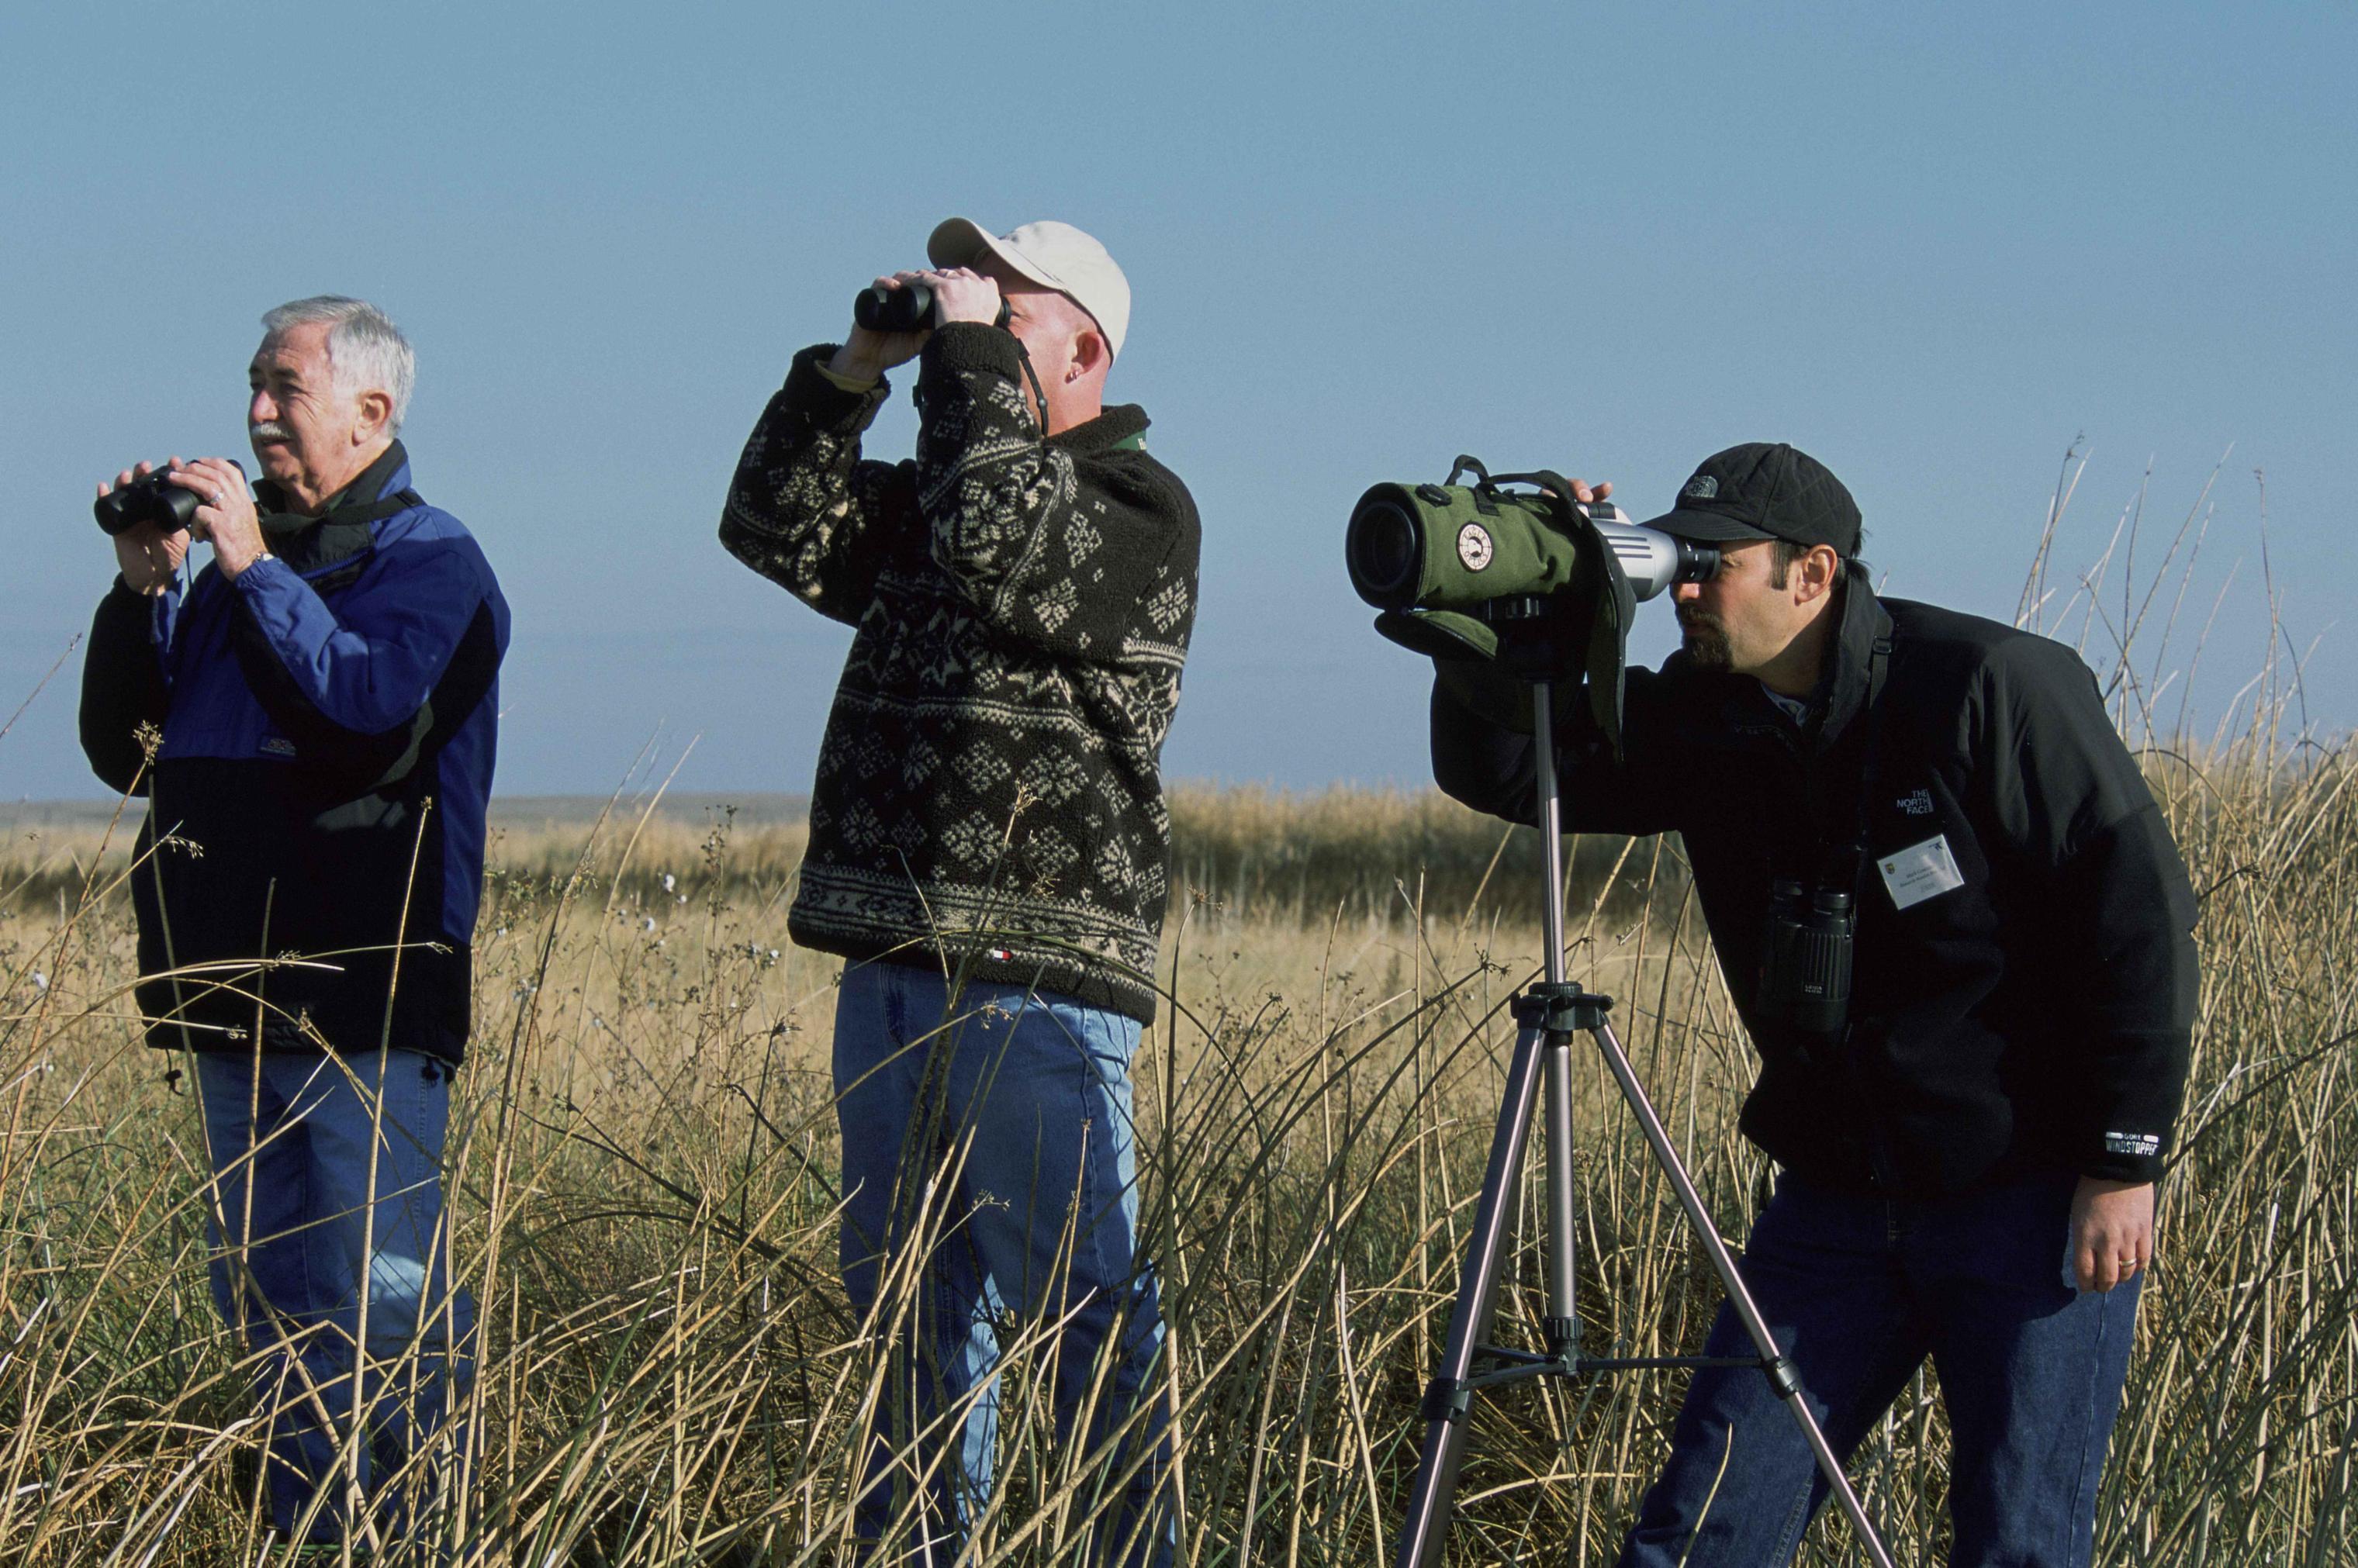 A group of men stand birdwatching